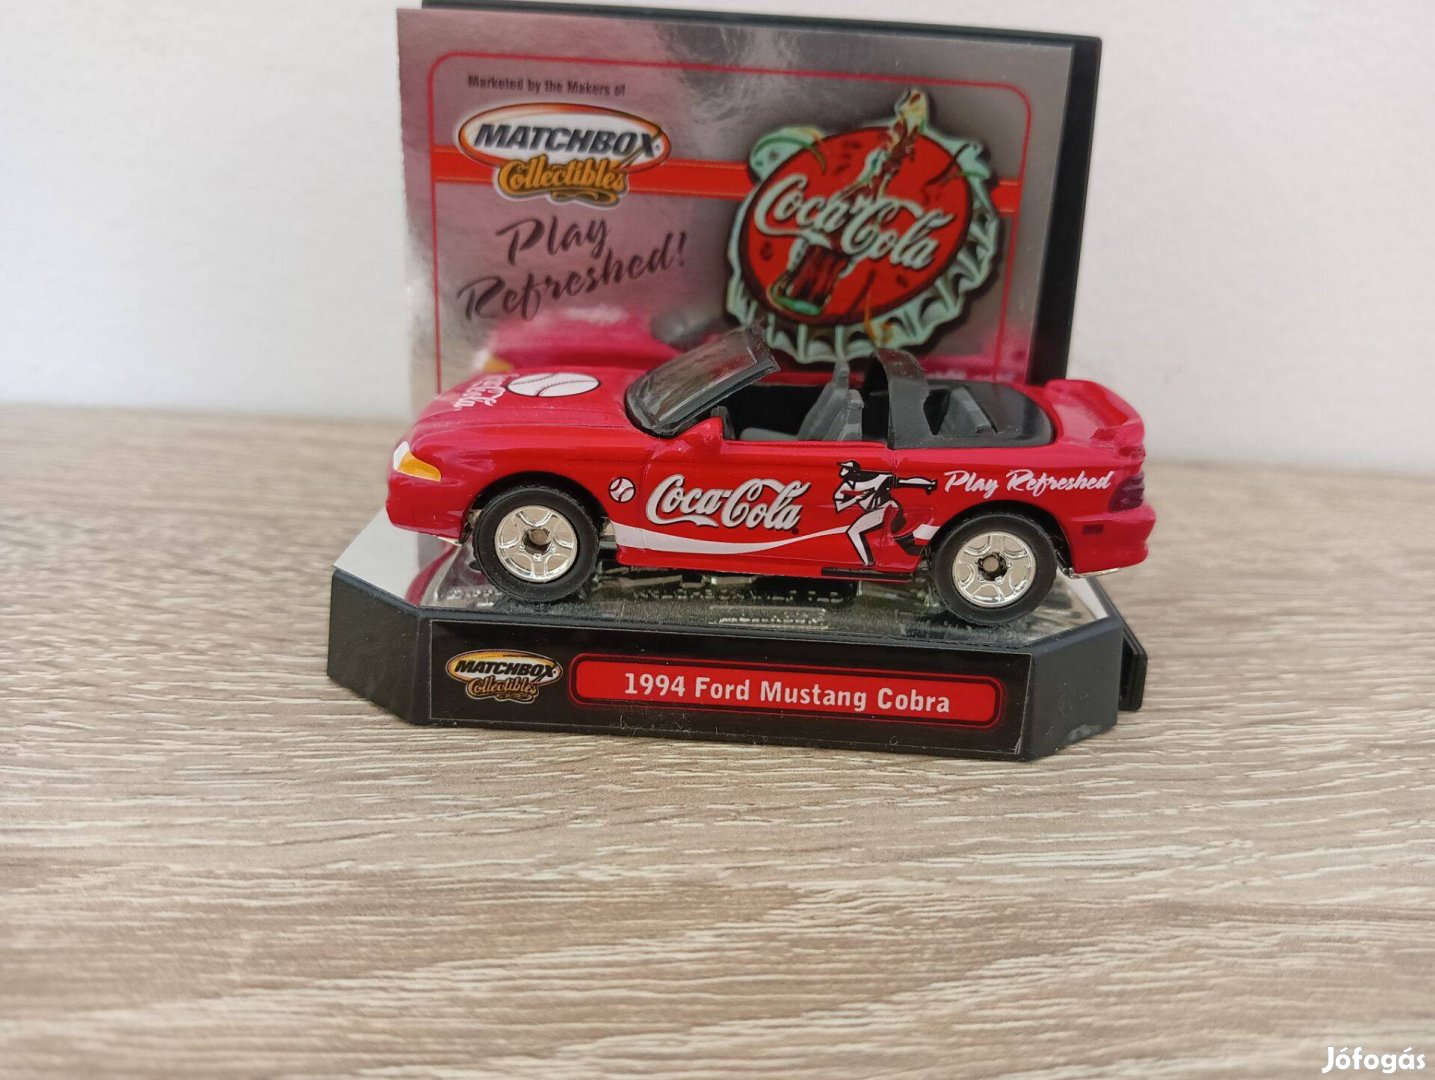 Matchbox Coca Cola Coke Collection 1994 Ford Mustang Cobra